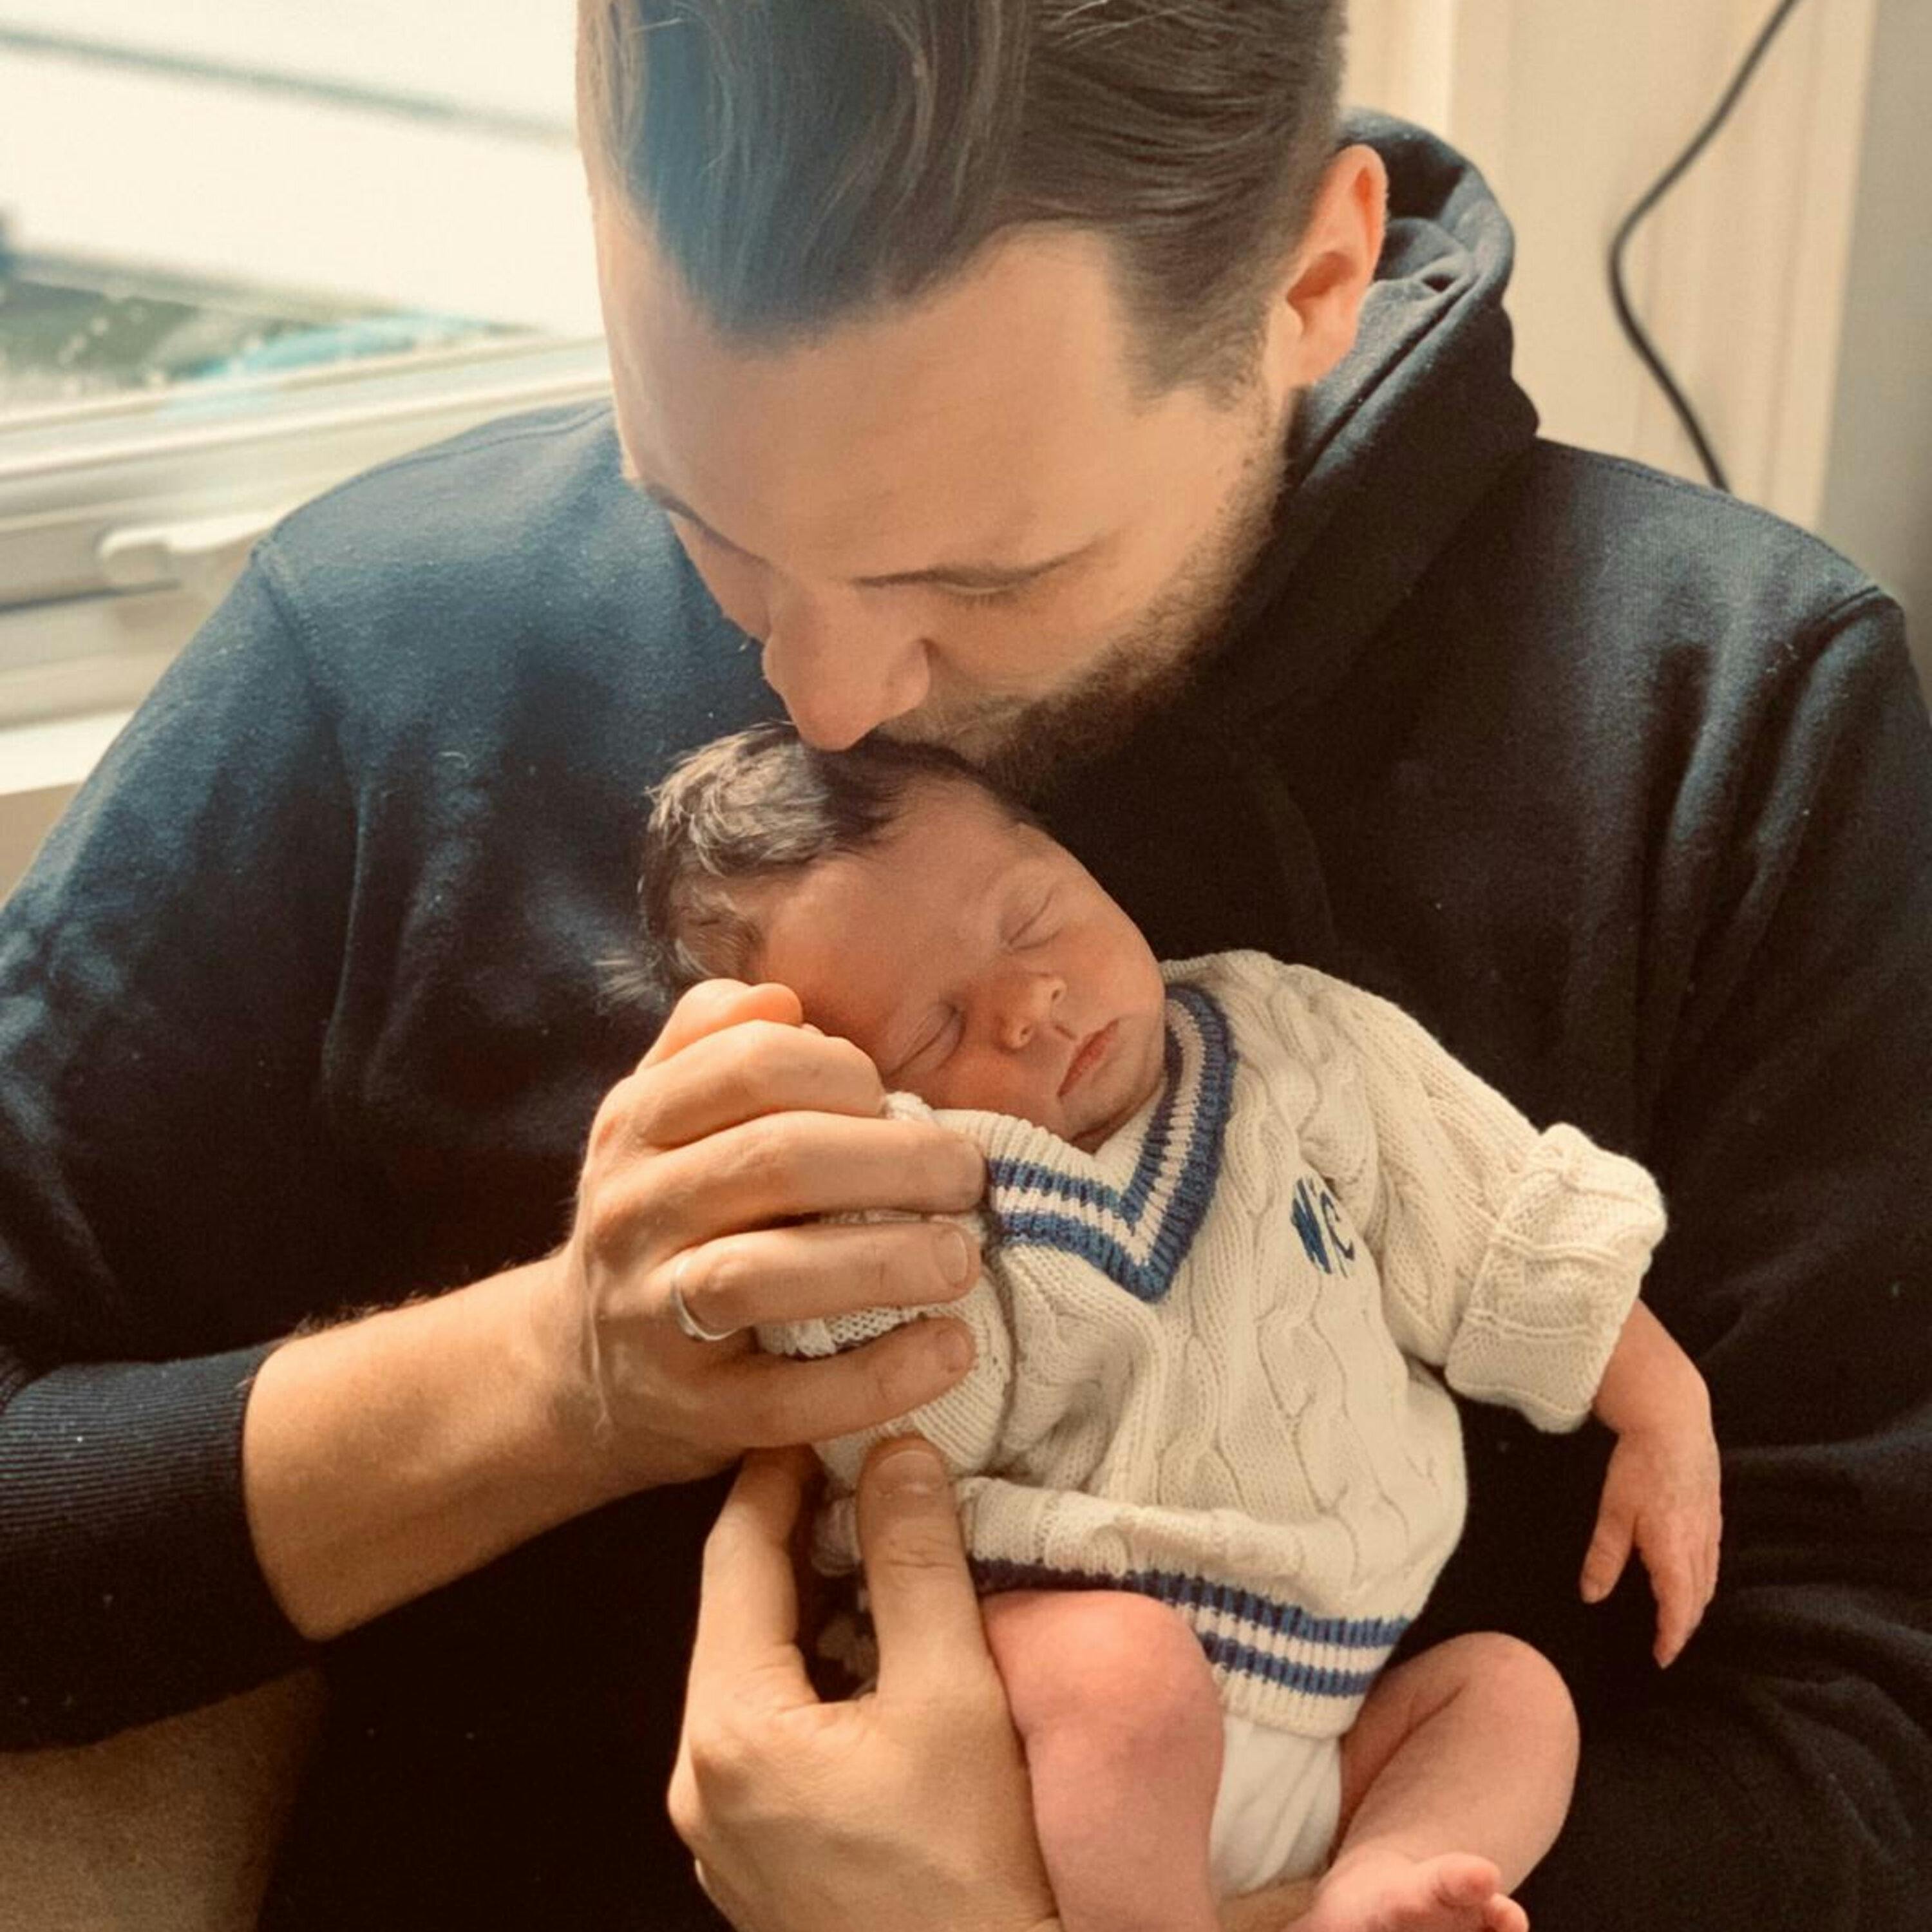 ADAM HAS A BABY NOW